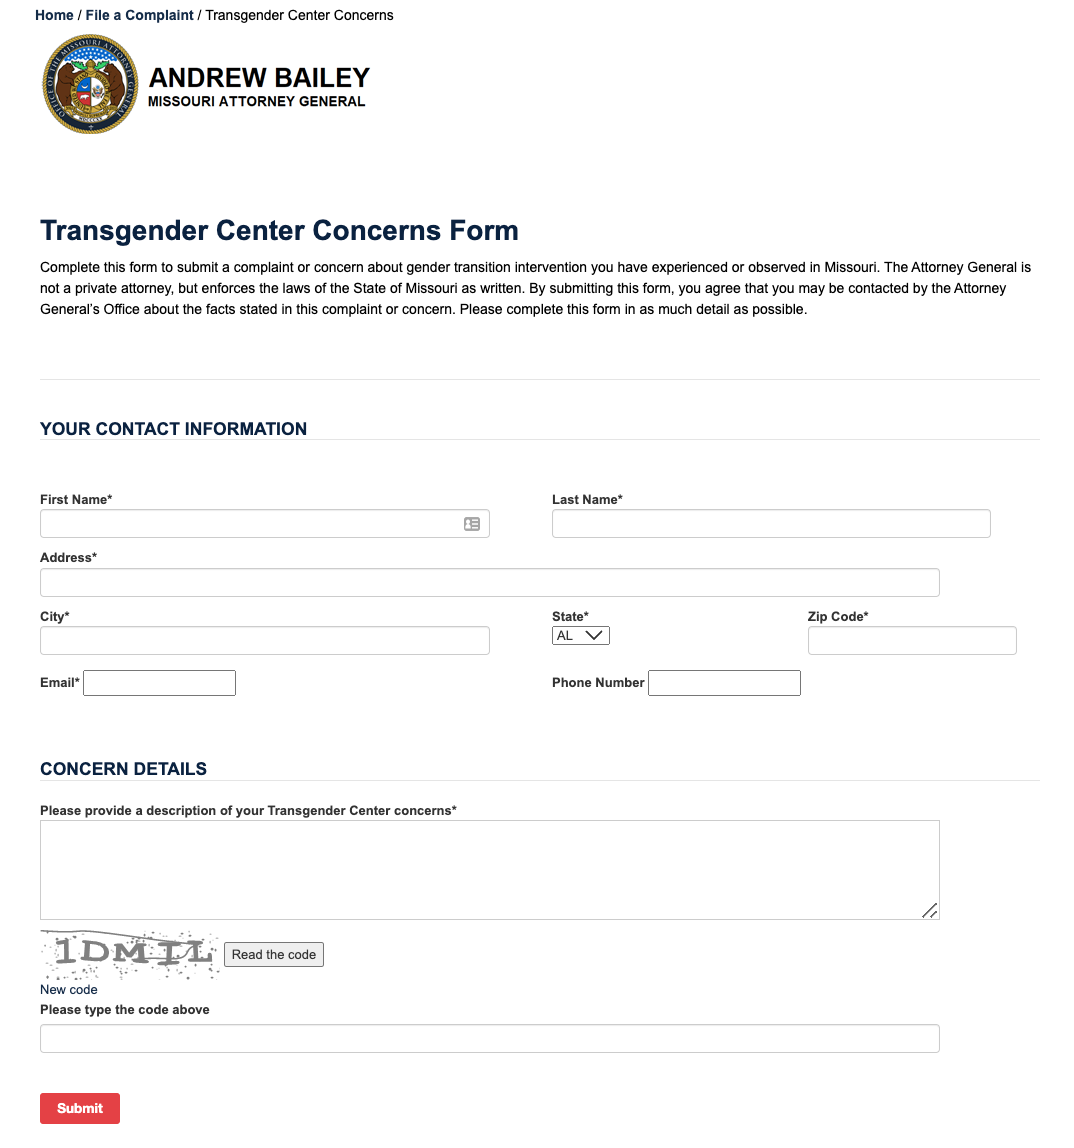 The form asked users to submit complaints and concerns about gender-affirming care.